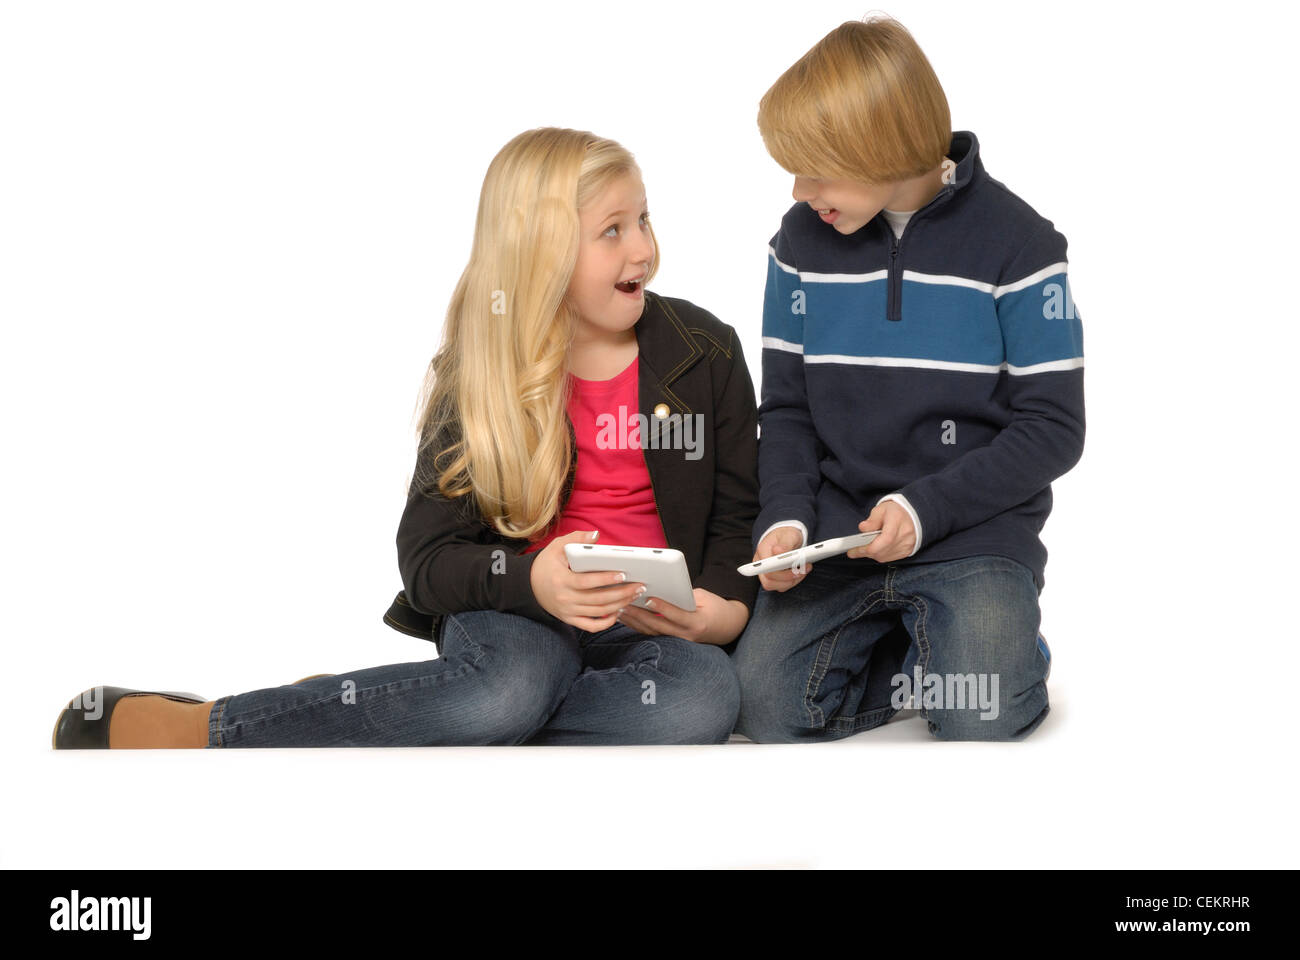 Ten year old girl and eleven year old boy using tablet computers or eBook readers and smiling. Stock Photo